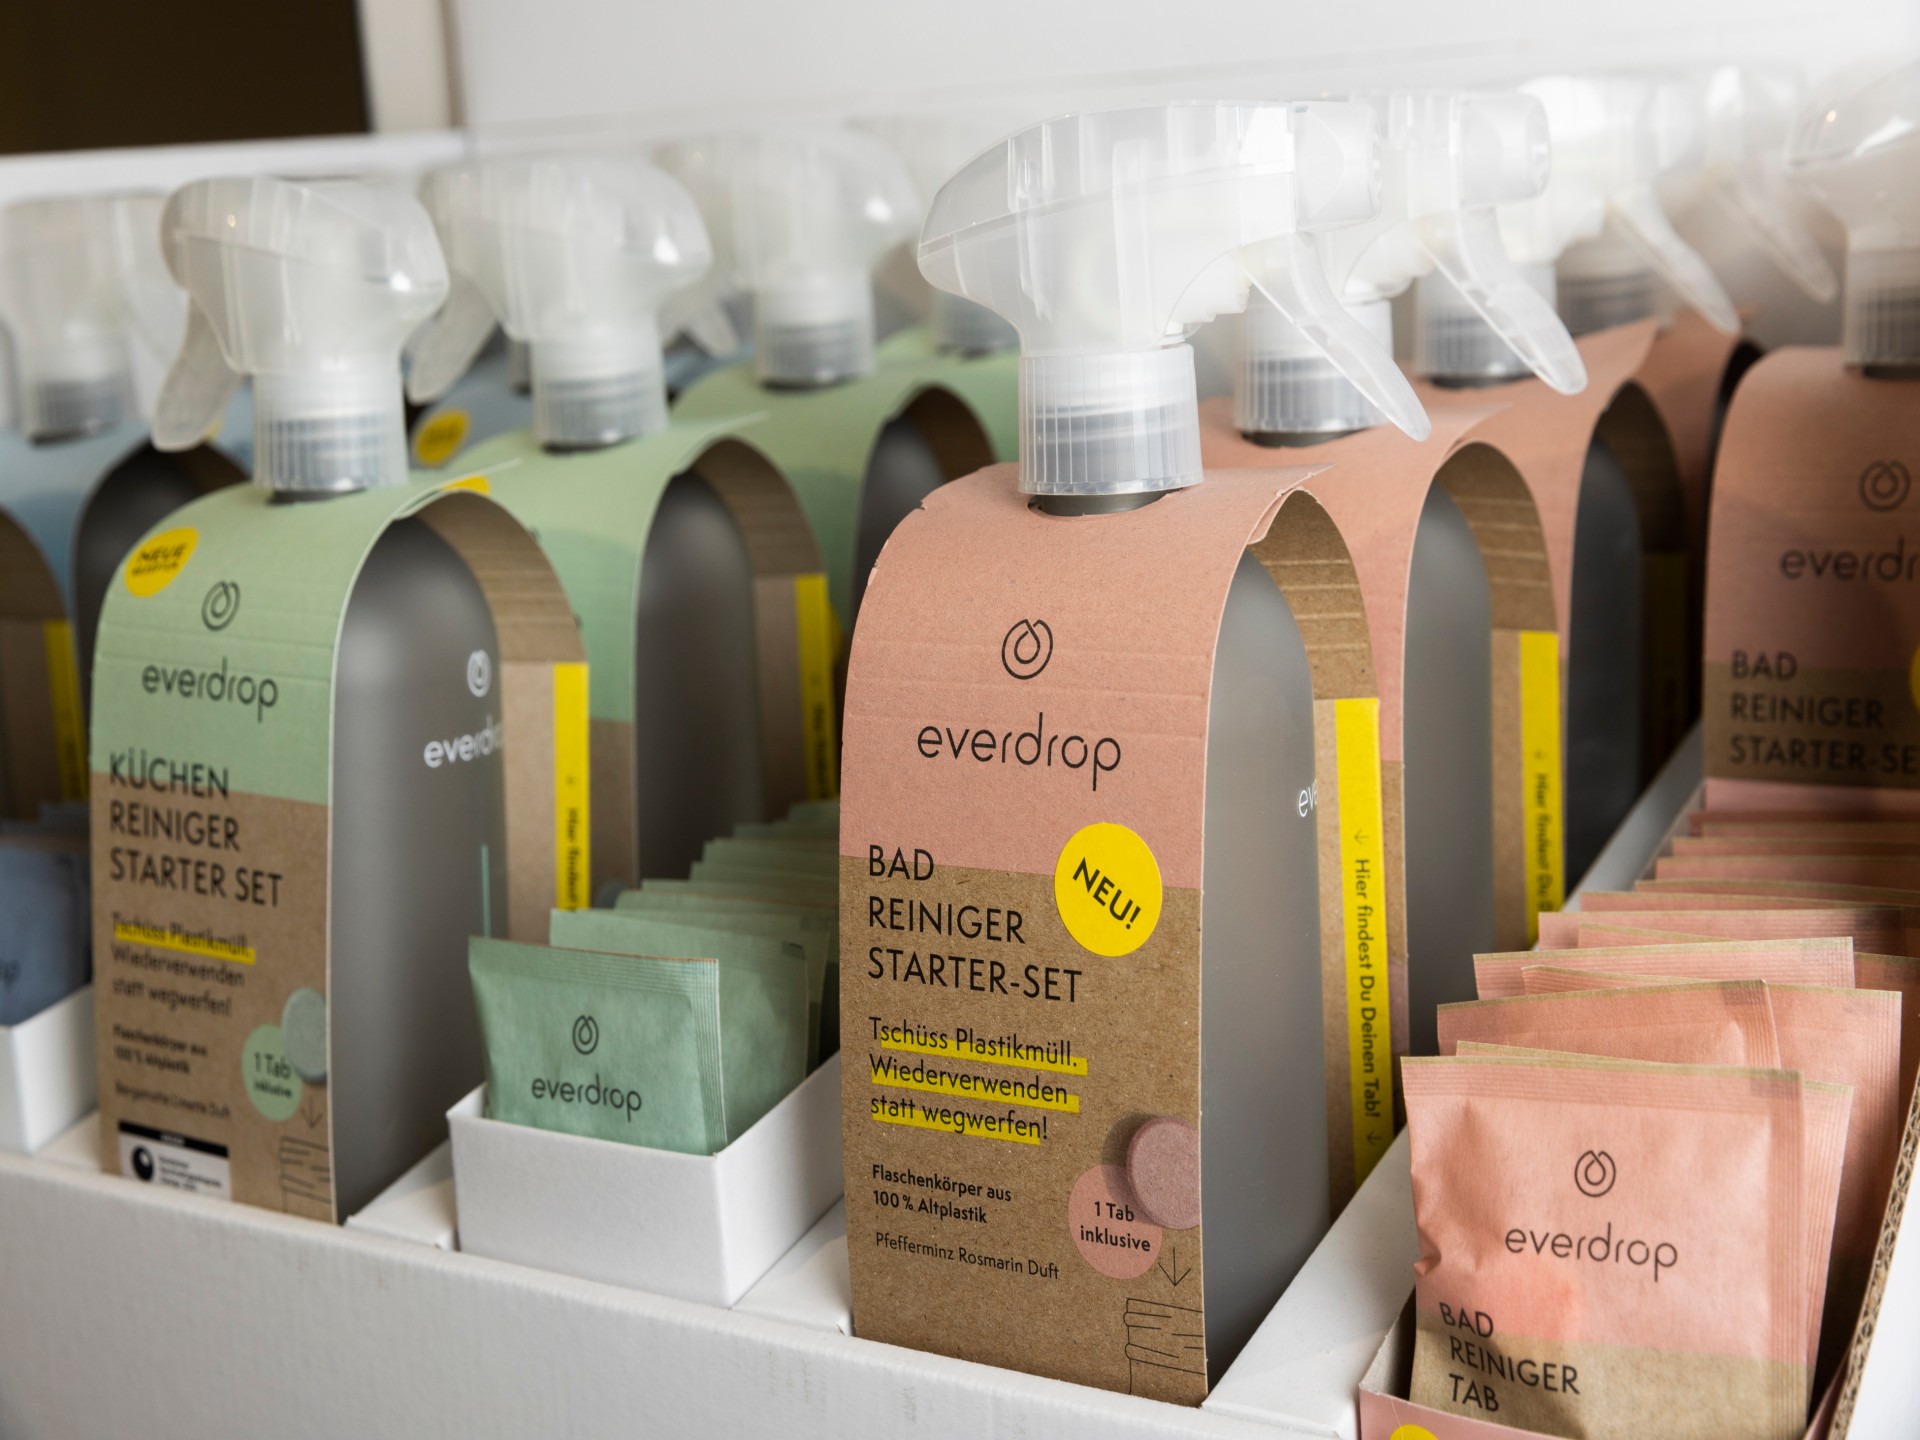 The Everdrop products are lined up next to each other